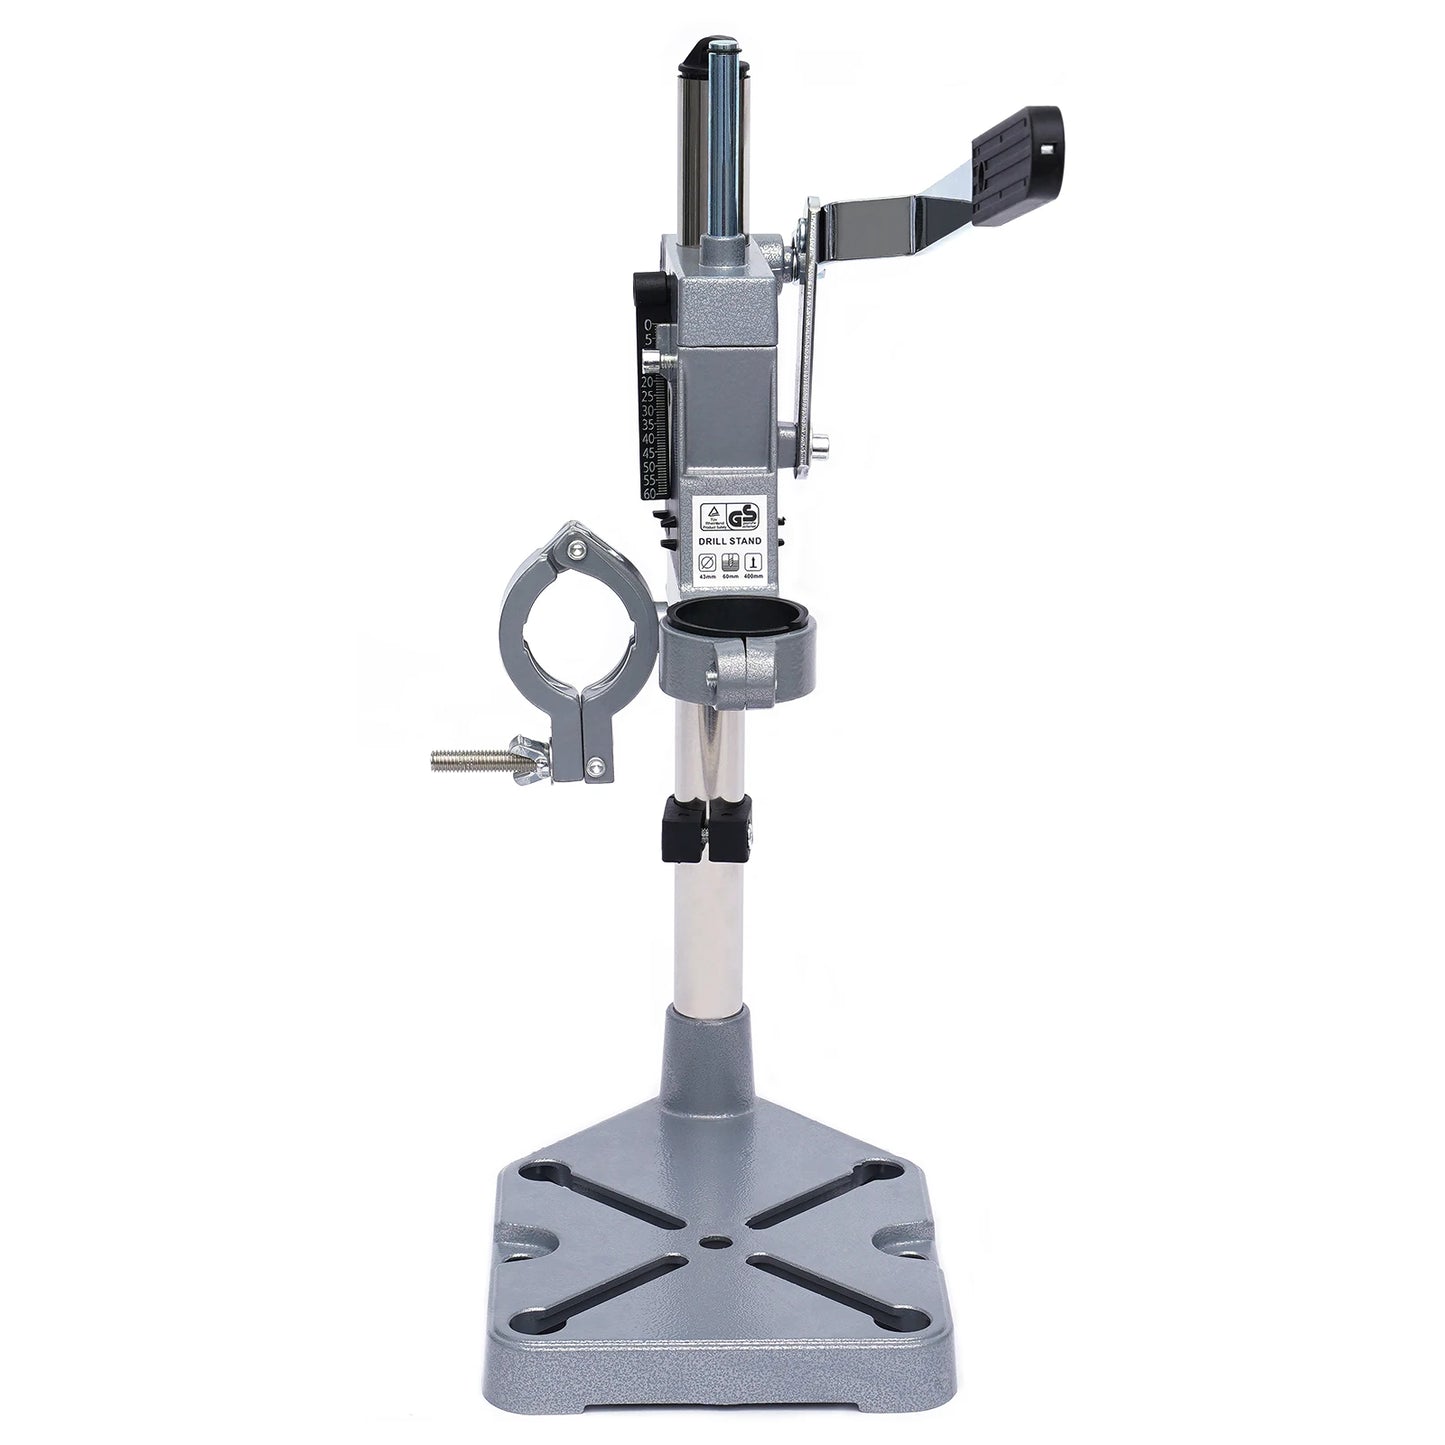 Adjustable Bench Clamp Floor Drill Press Stand Table Workbench Repair Tool For Drilling Base